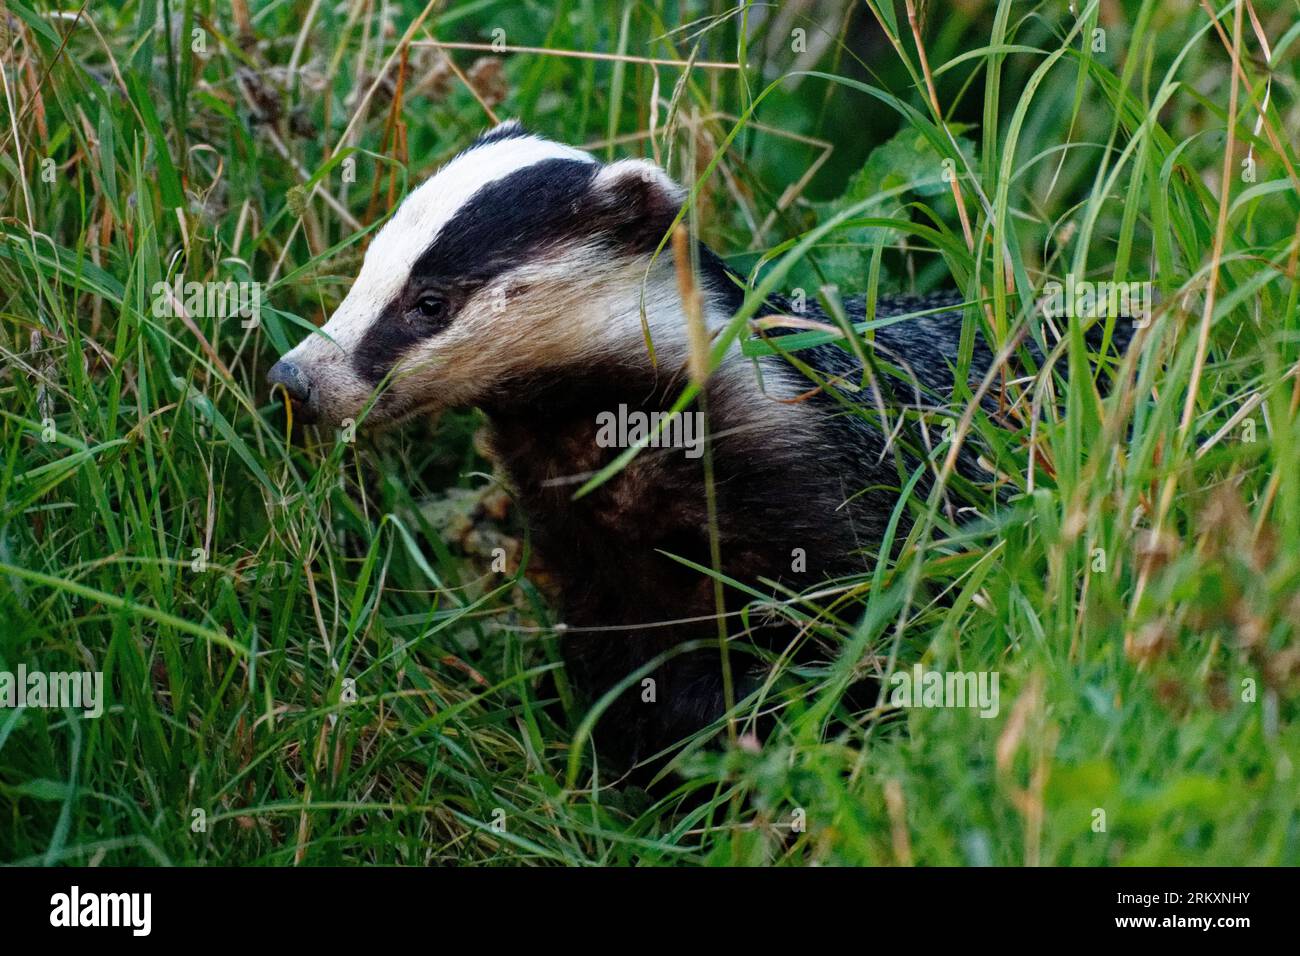 European Badger (Meles meles) Adult in long grass looking. Stock Photo